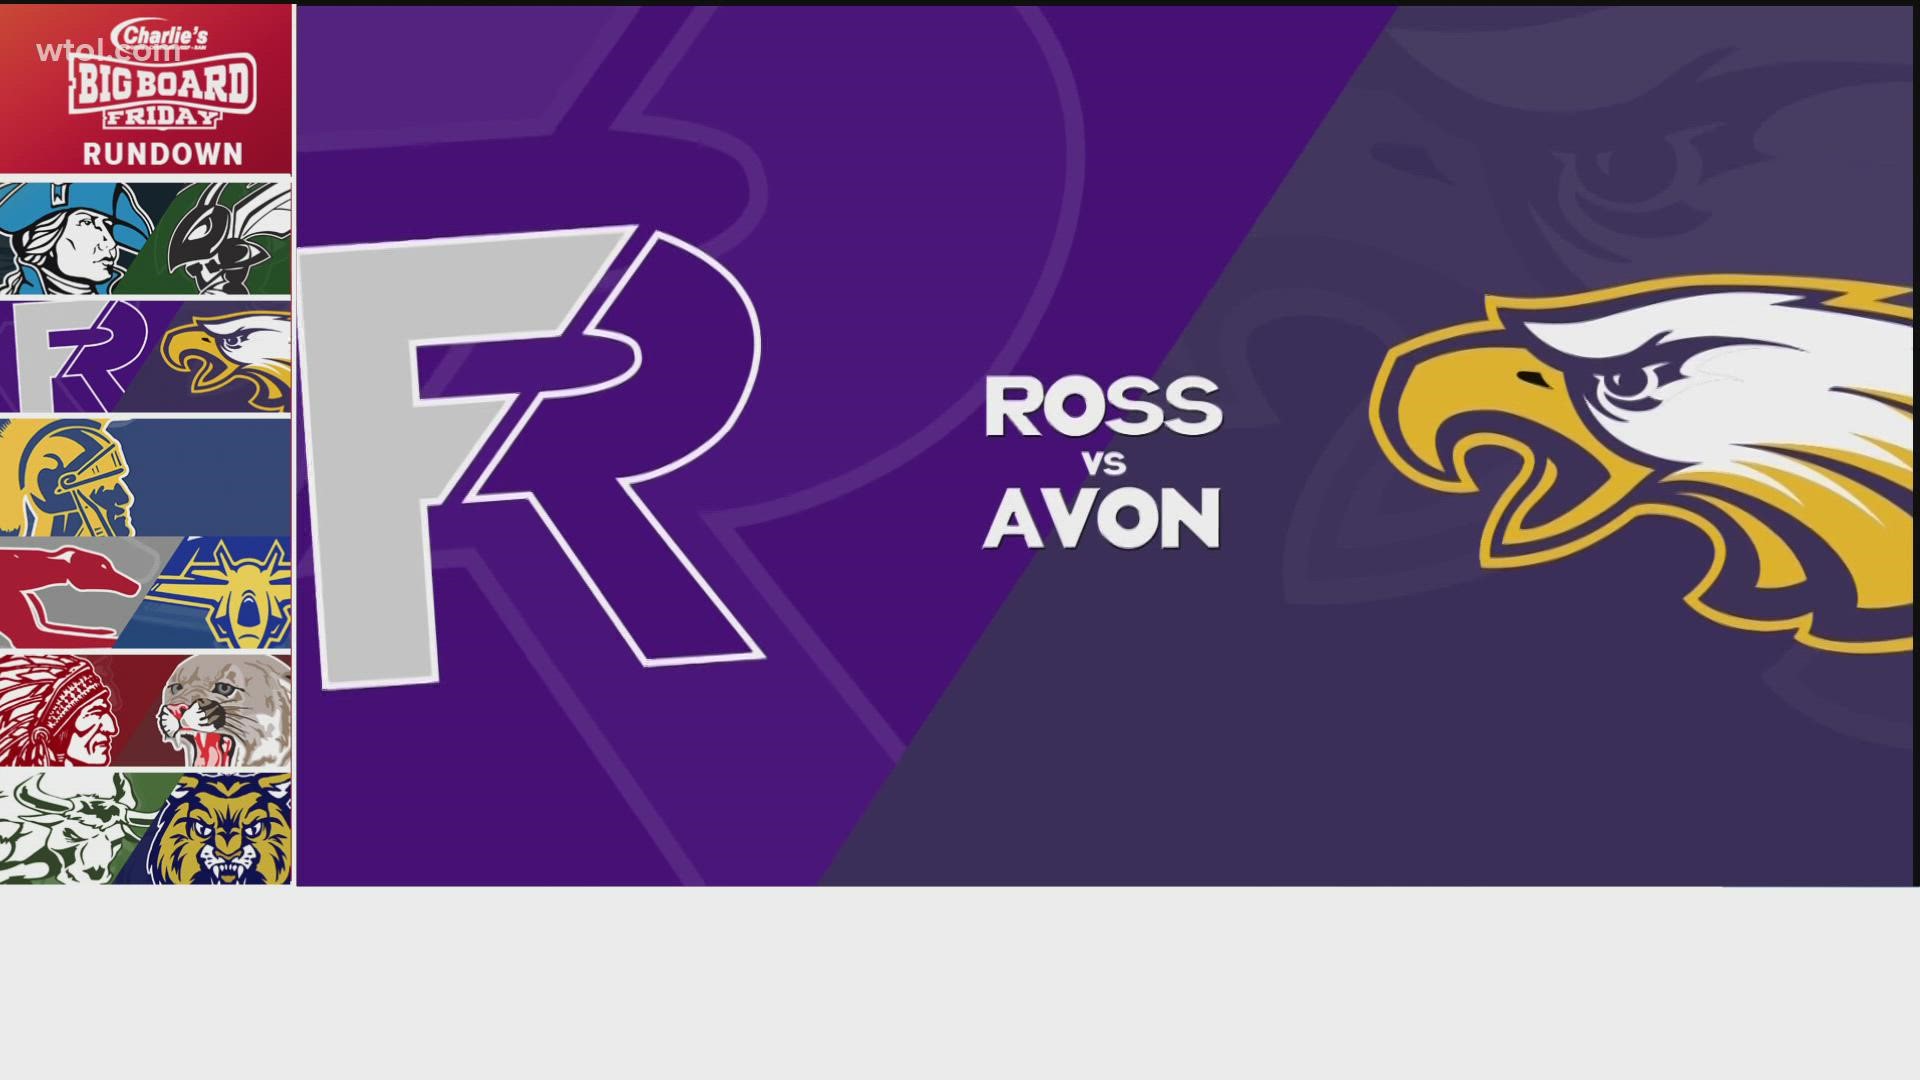 Division II. Fremont Ross on the road and a short trip on the turnpike to take on Avon. Little Giants battle hard to keep going but fall short.